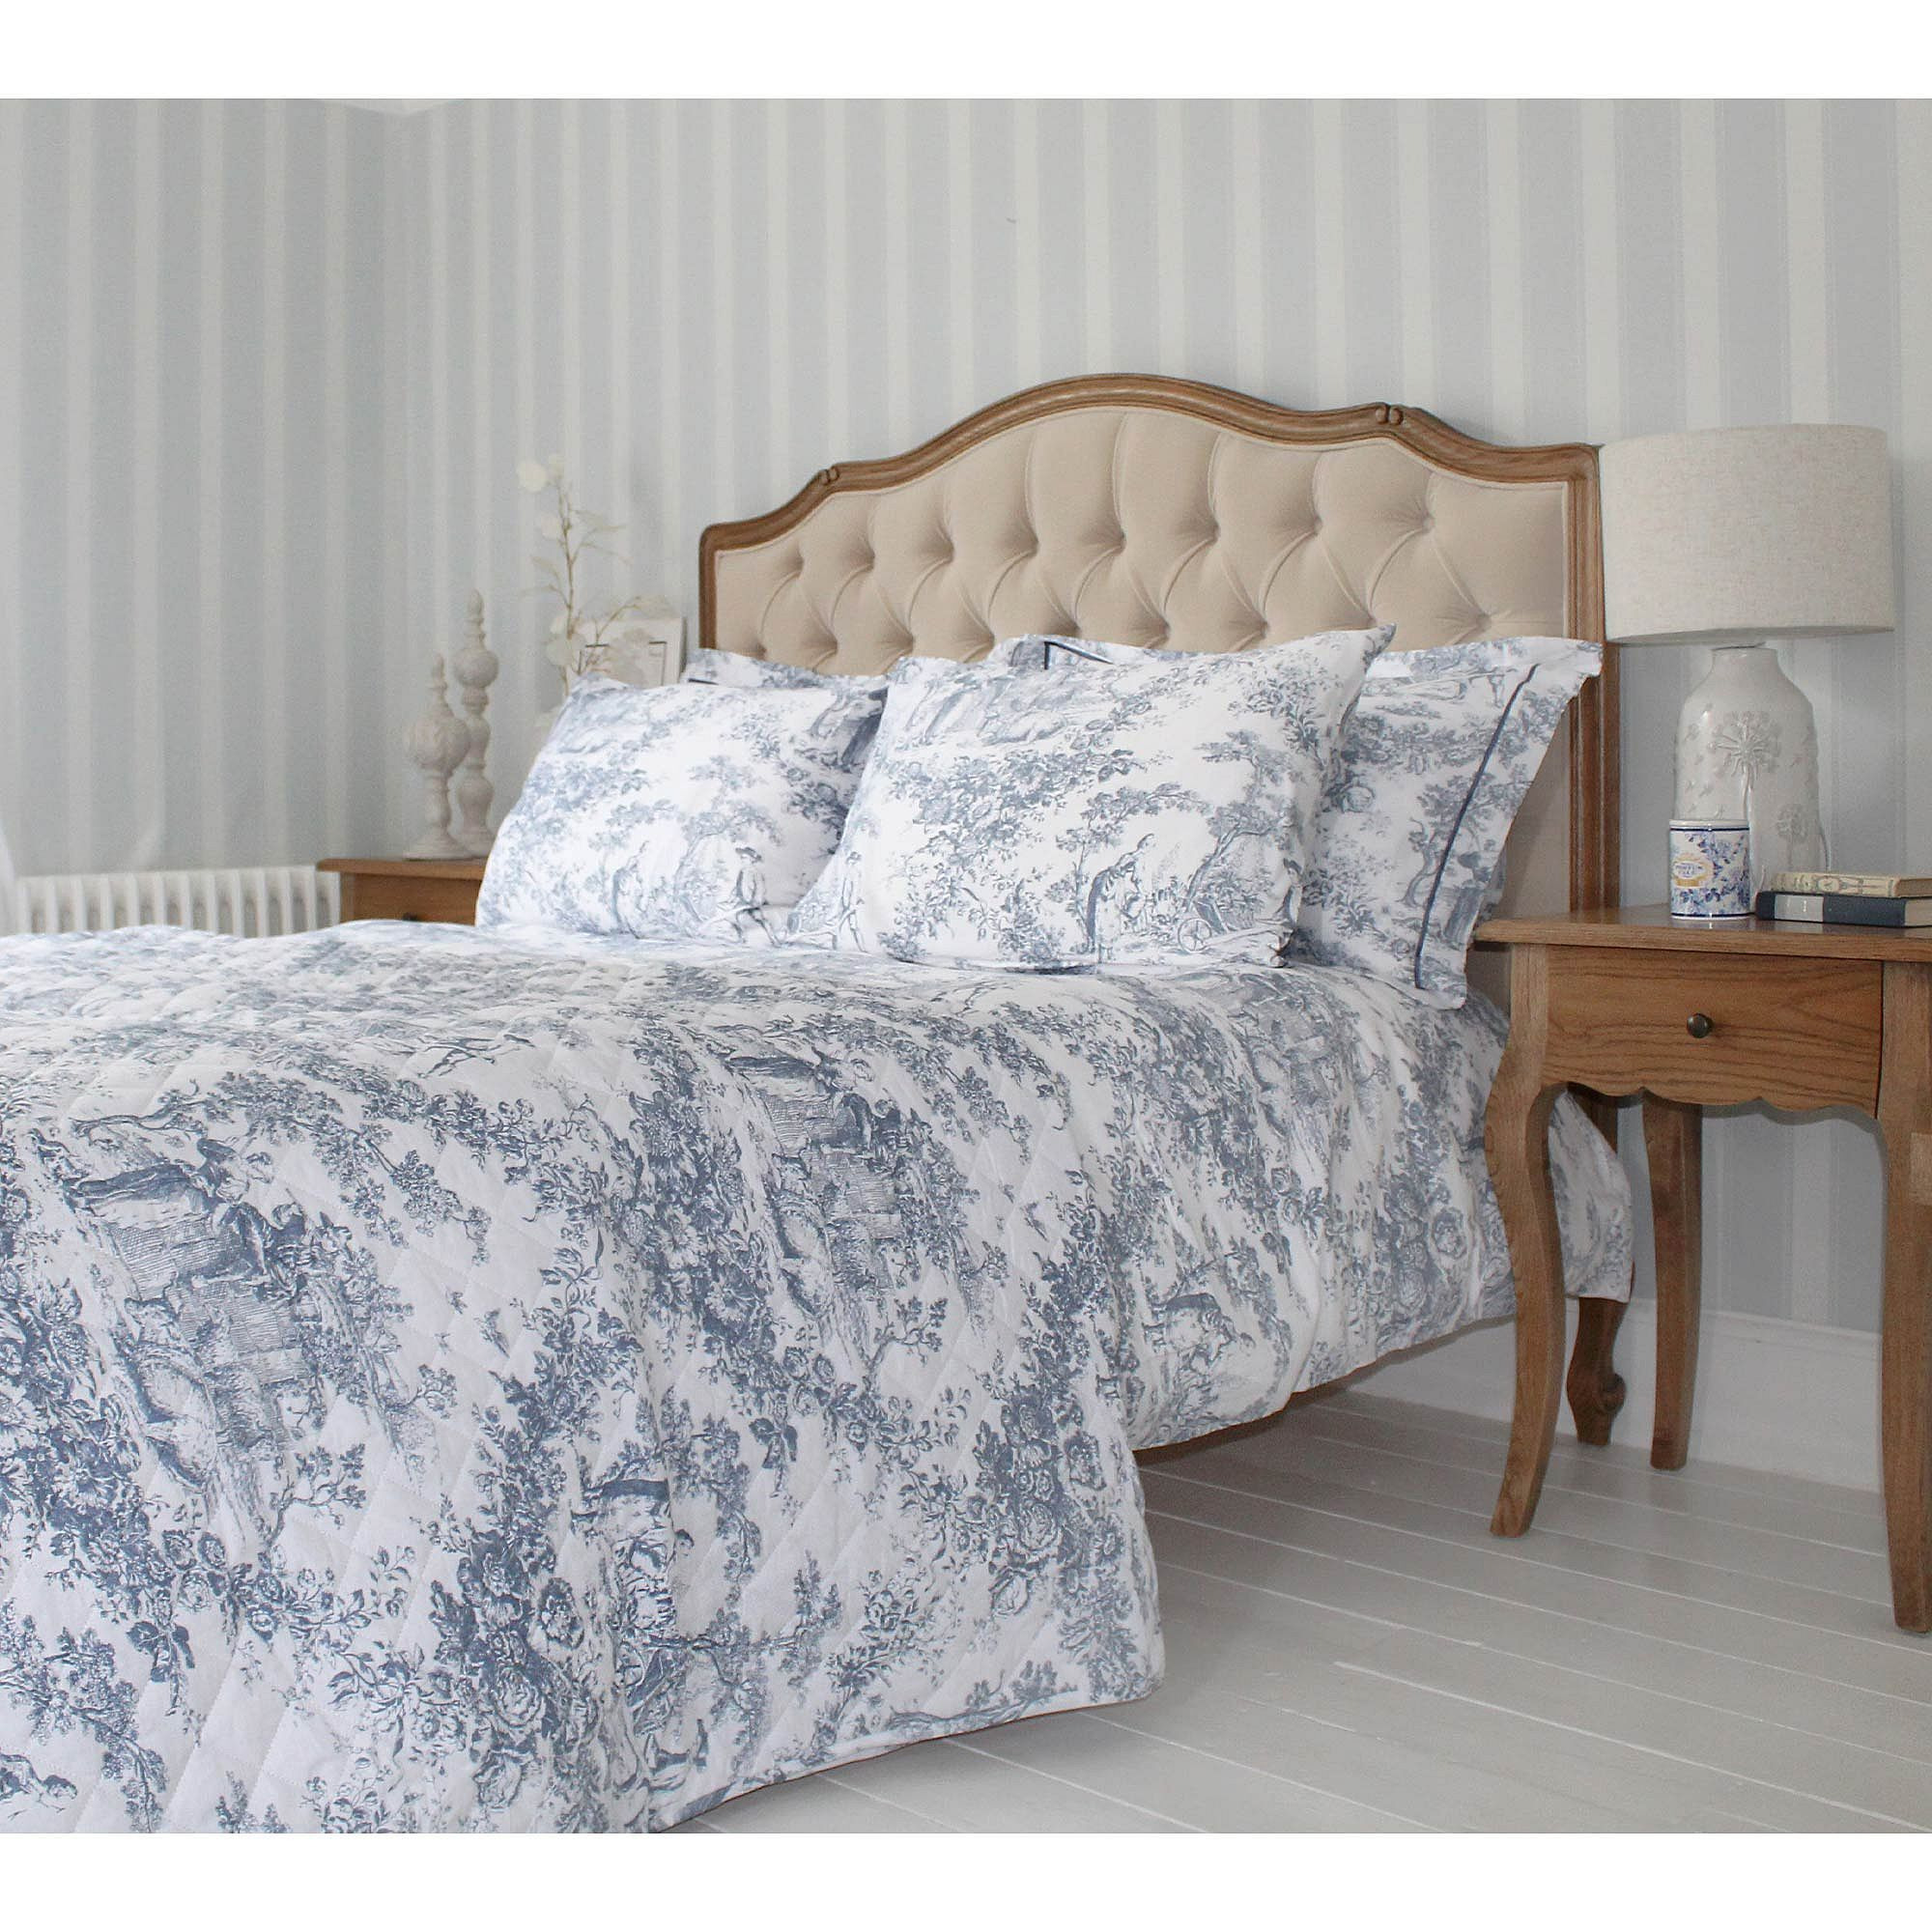 Country Toile Blue Bedspread - image 1